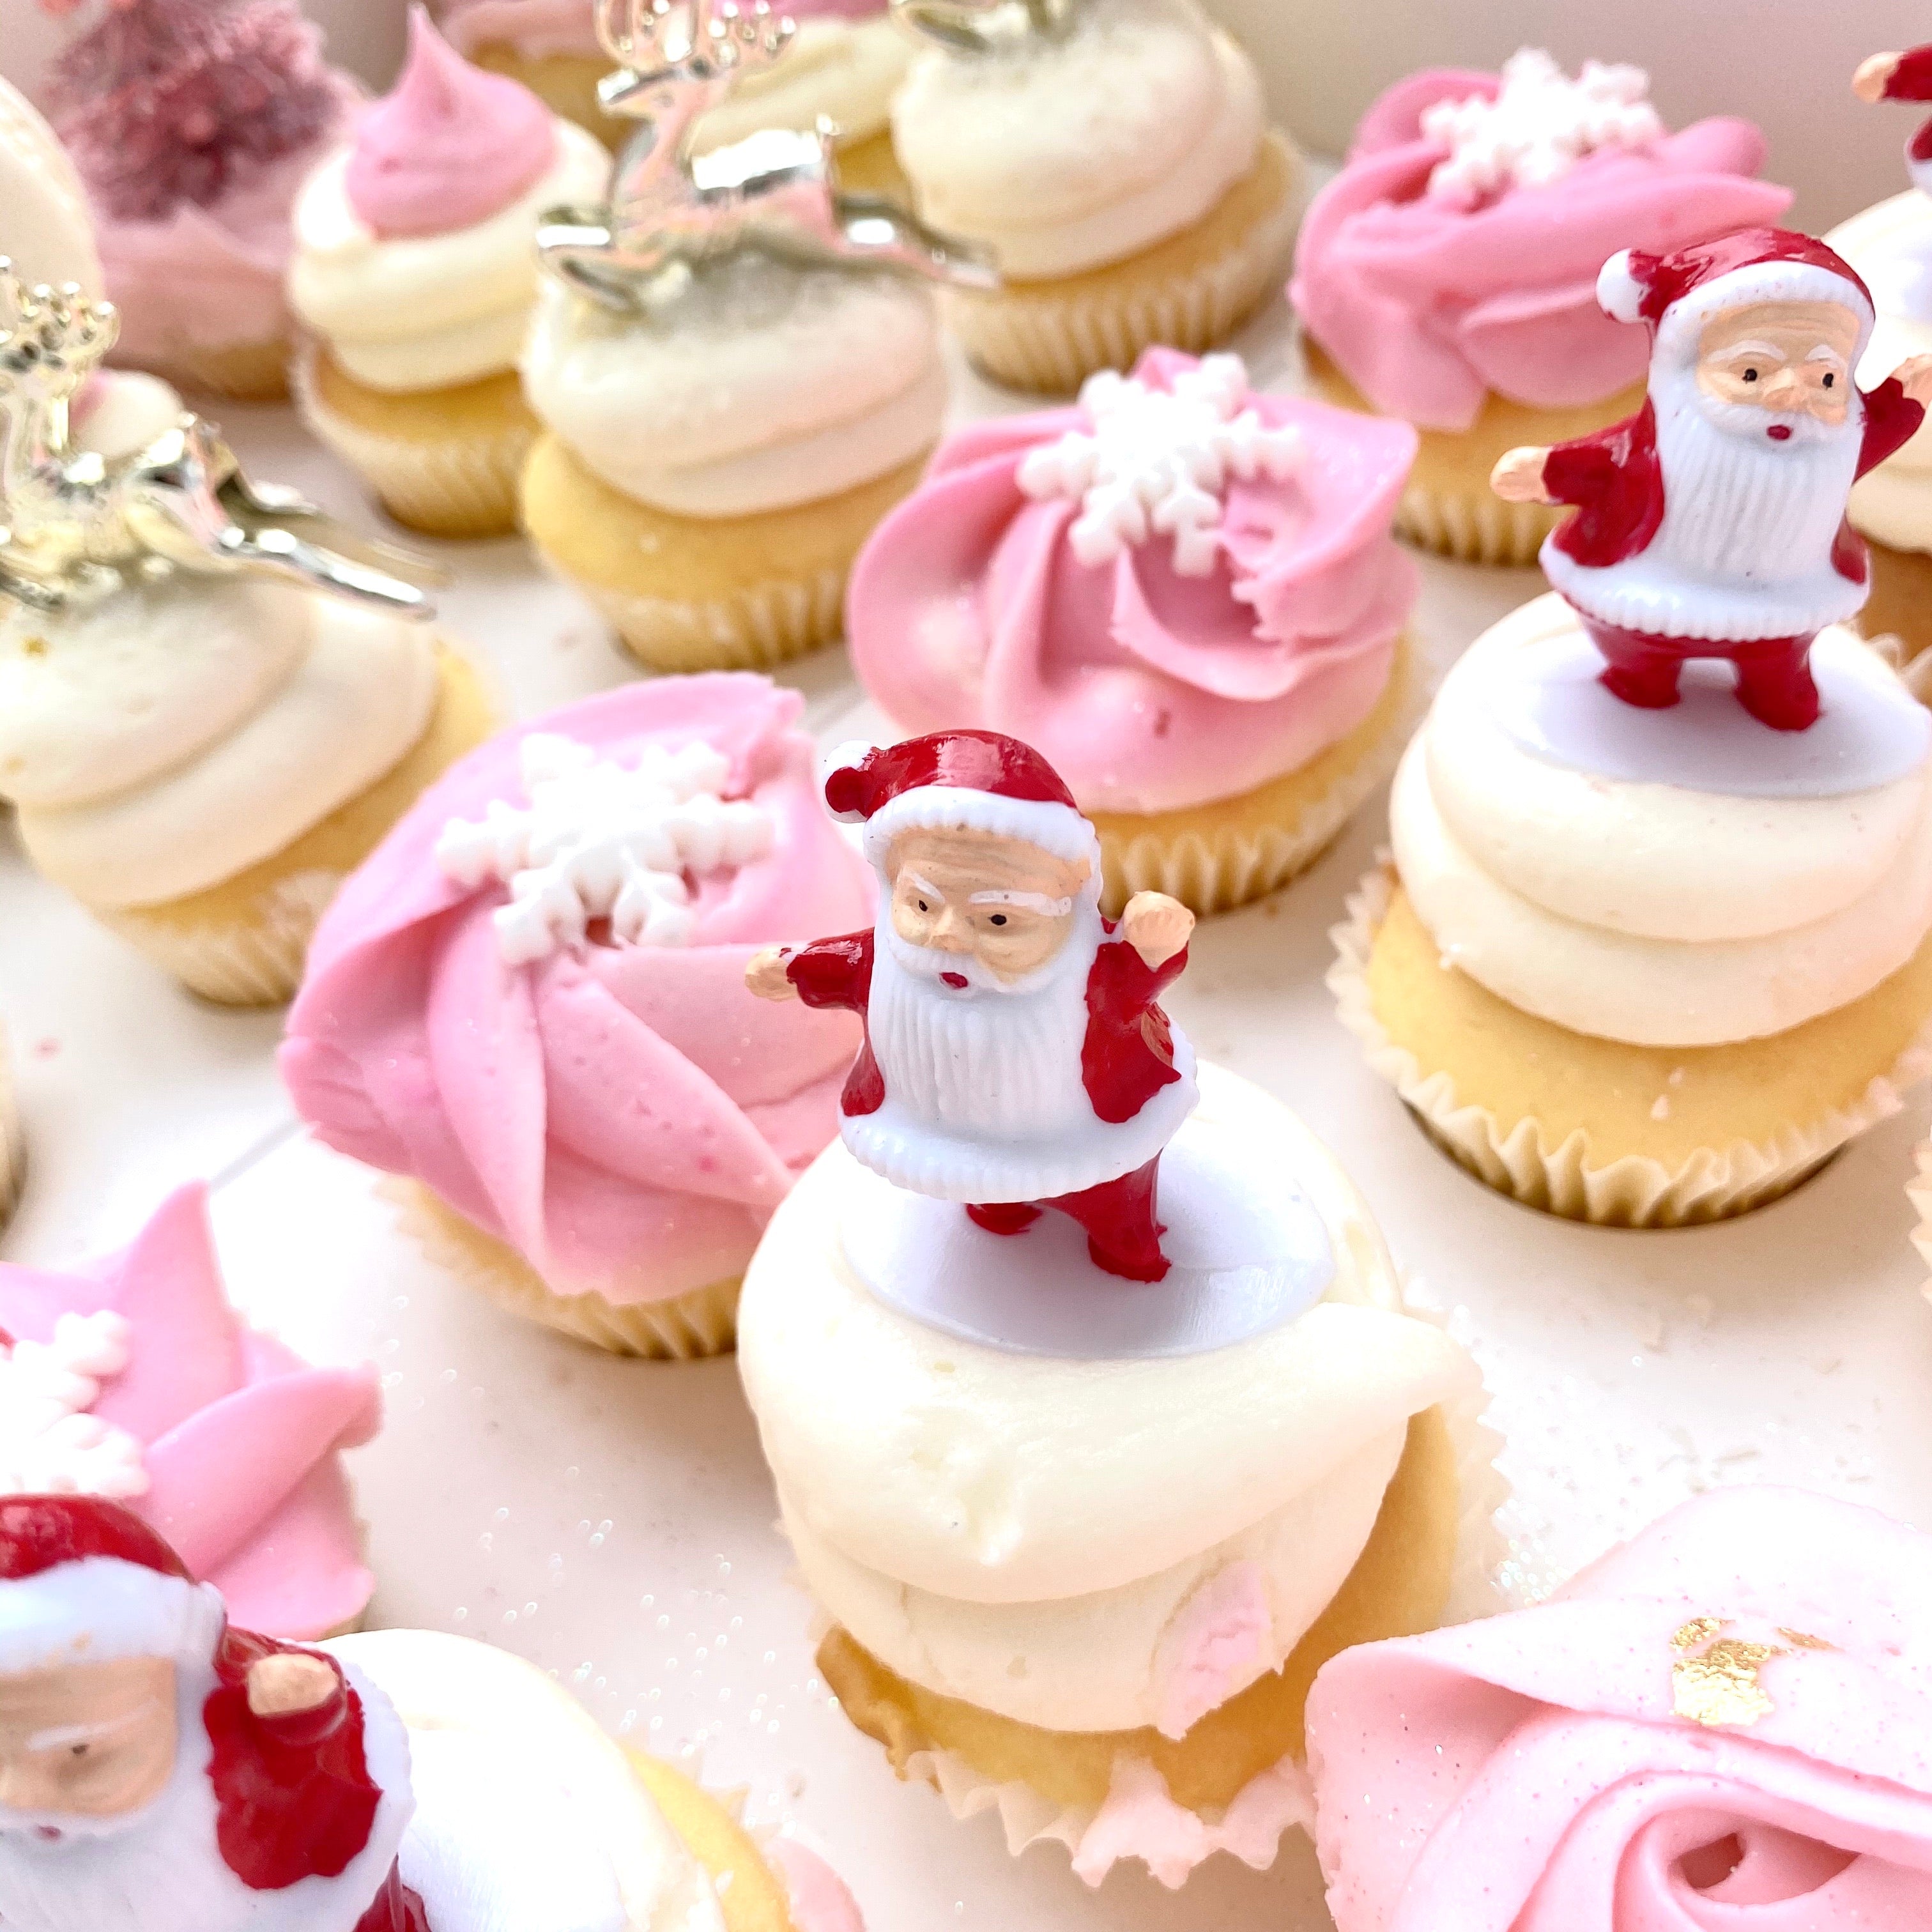 I’m dreaming of a Pink Christmas - Cupcake Occasion